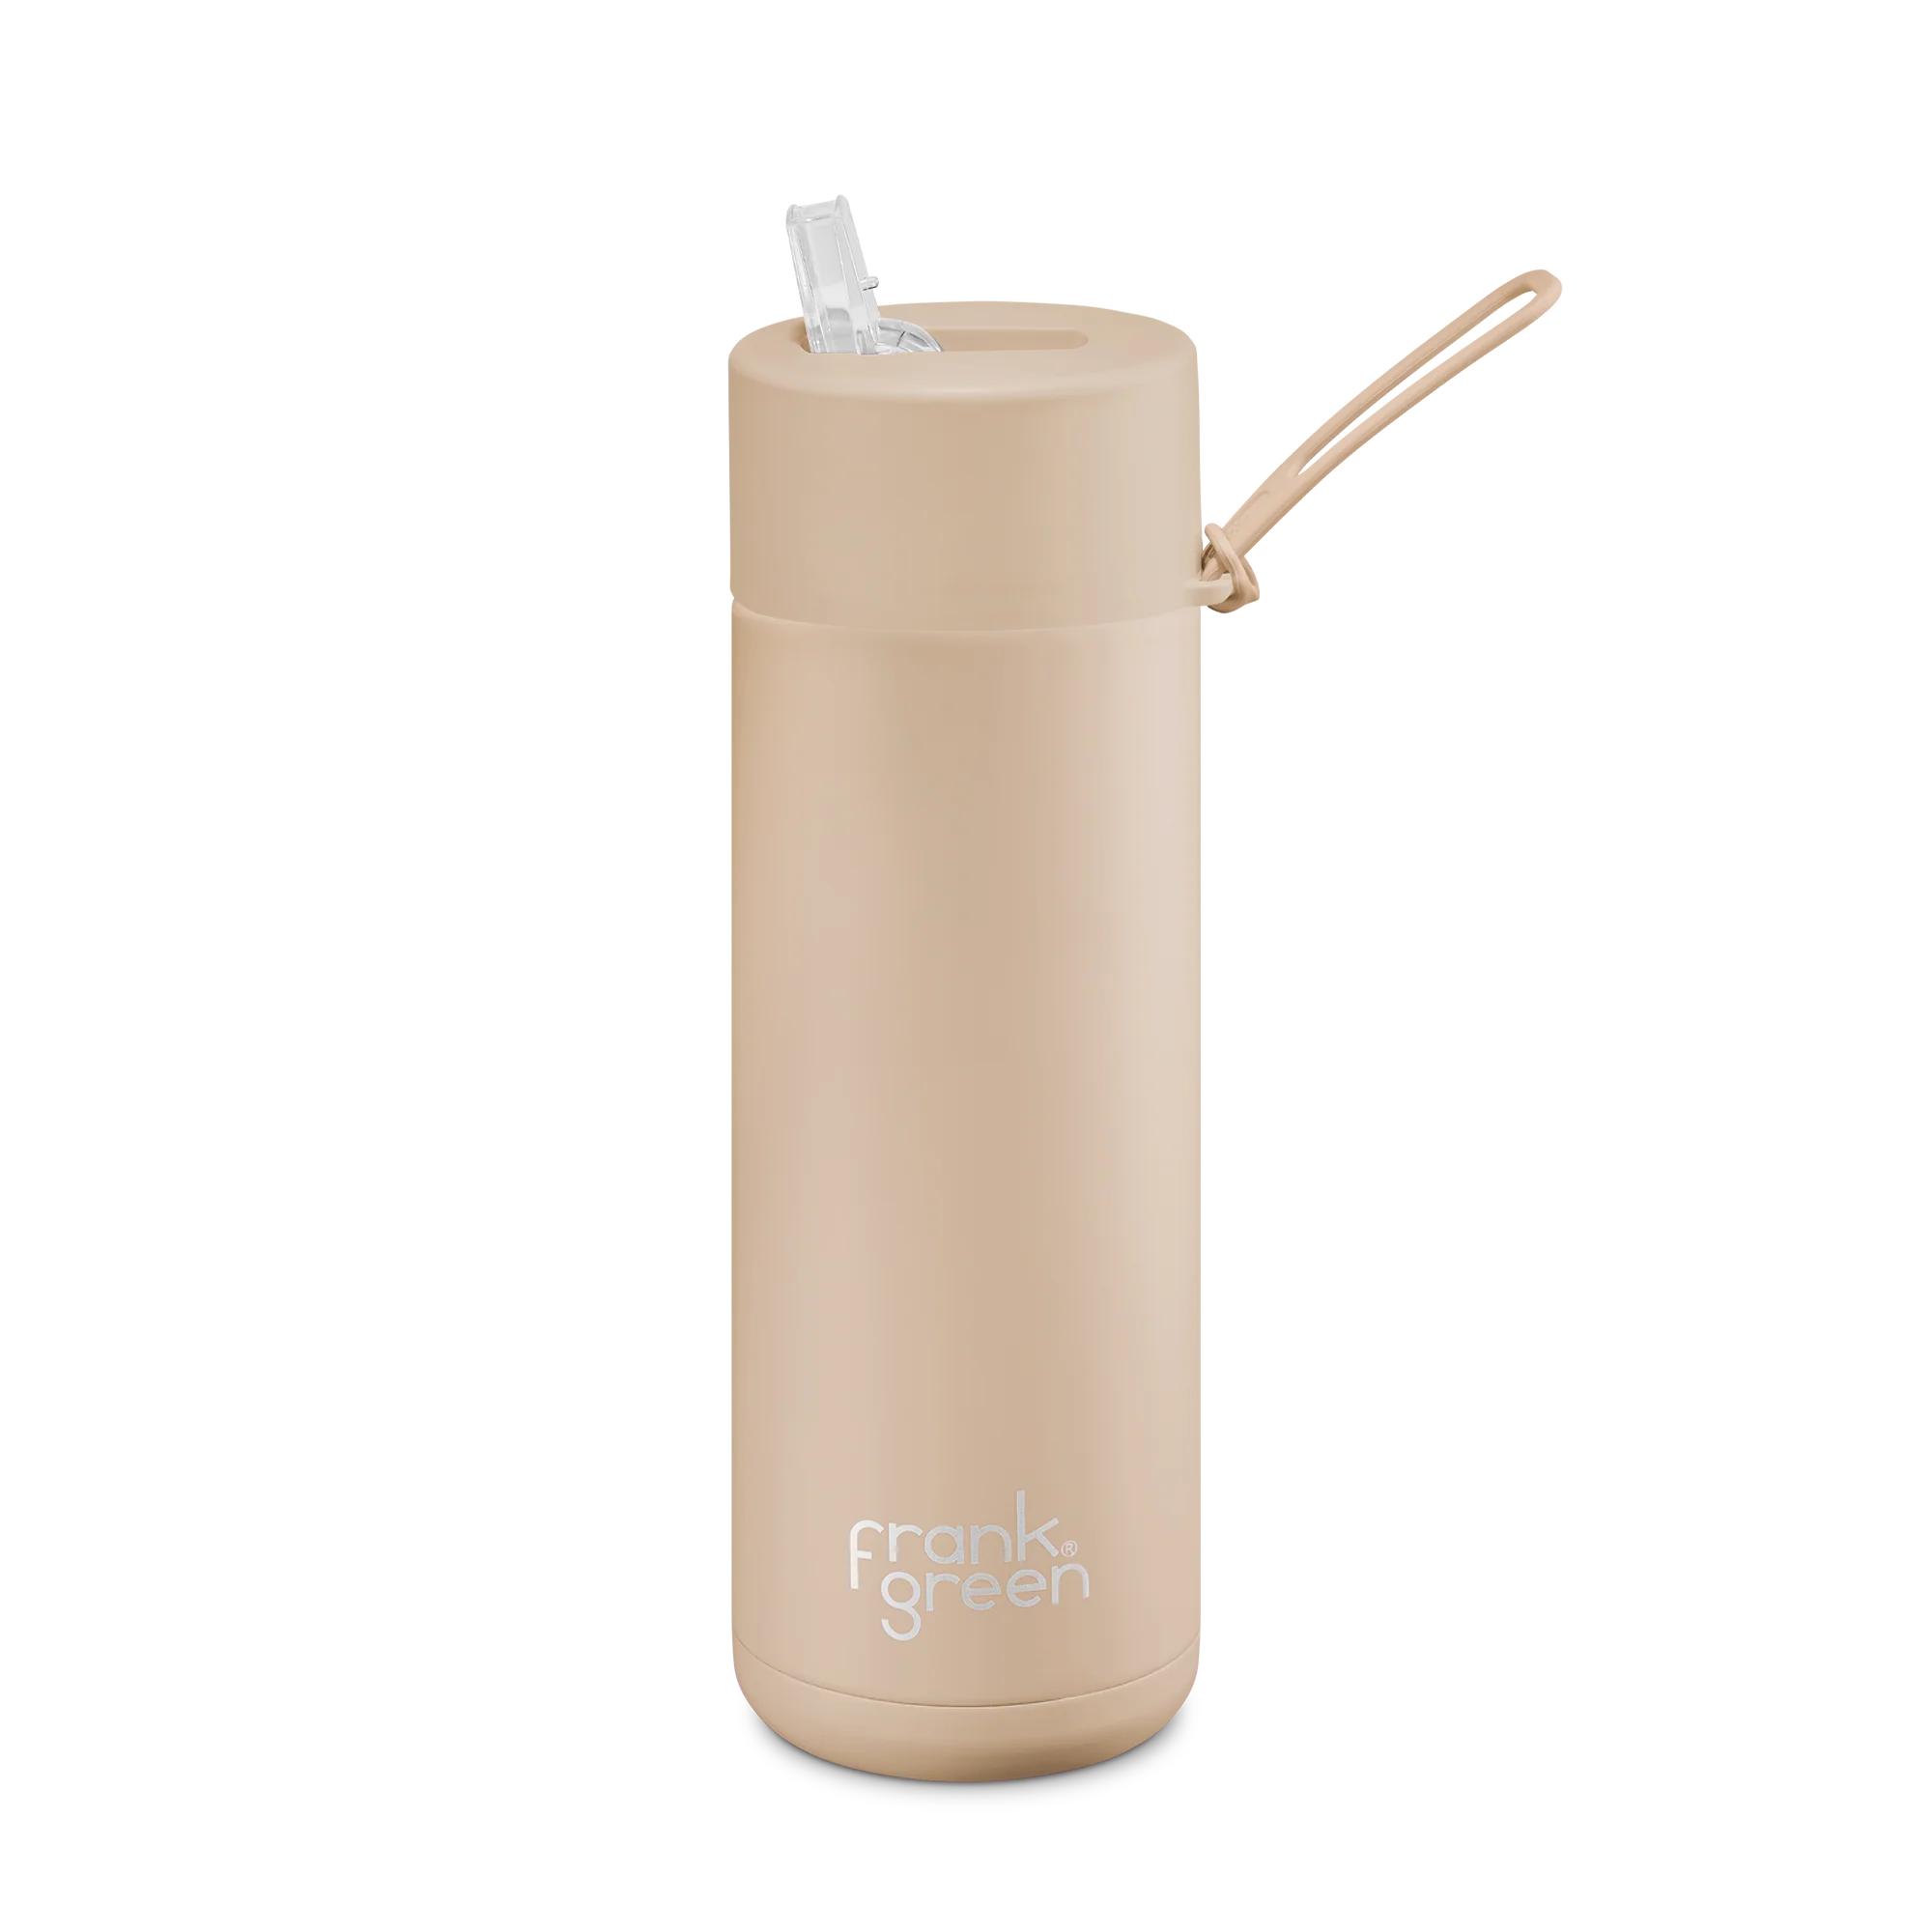 Frank Green Stainless Steel Ceramic Reusable Bottle Soft Stone With Straw 20oz/595ml